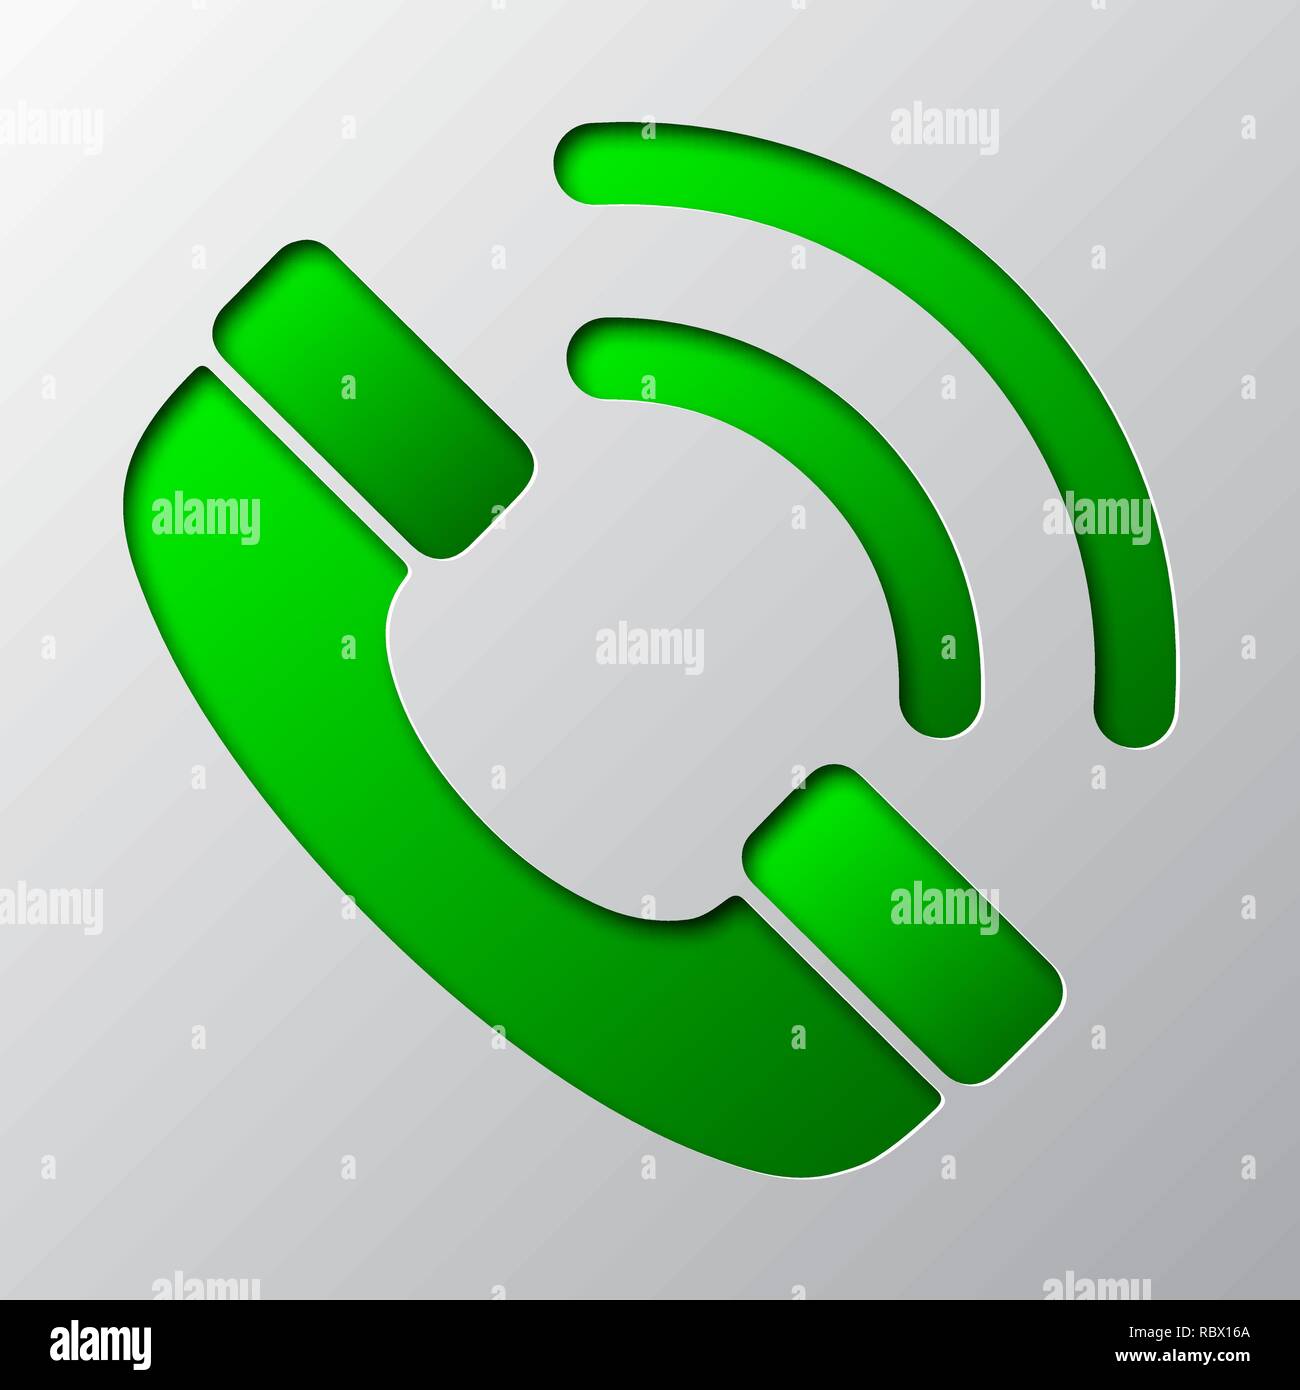 Paper art of green phone icon, isolated. Vector illustration. Phone handset icon is cut from paper. Stock Vector